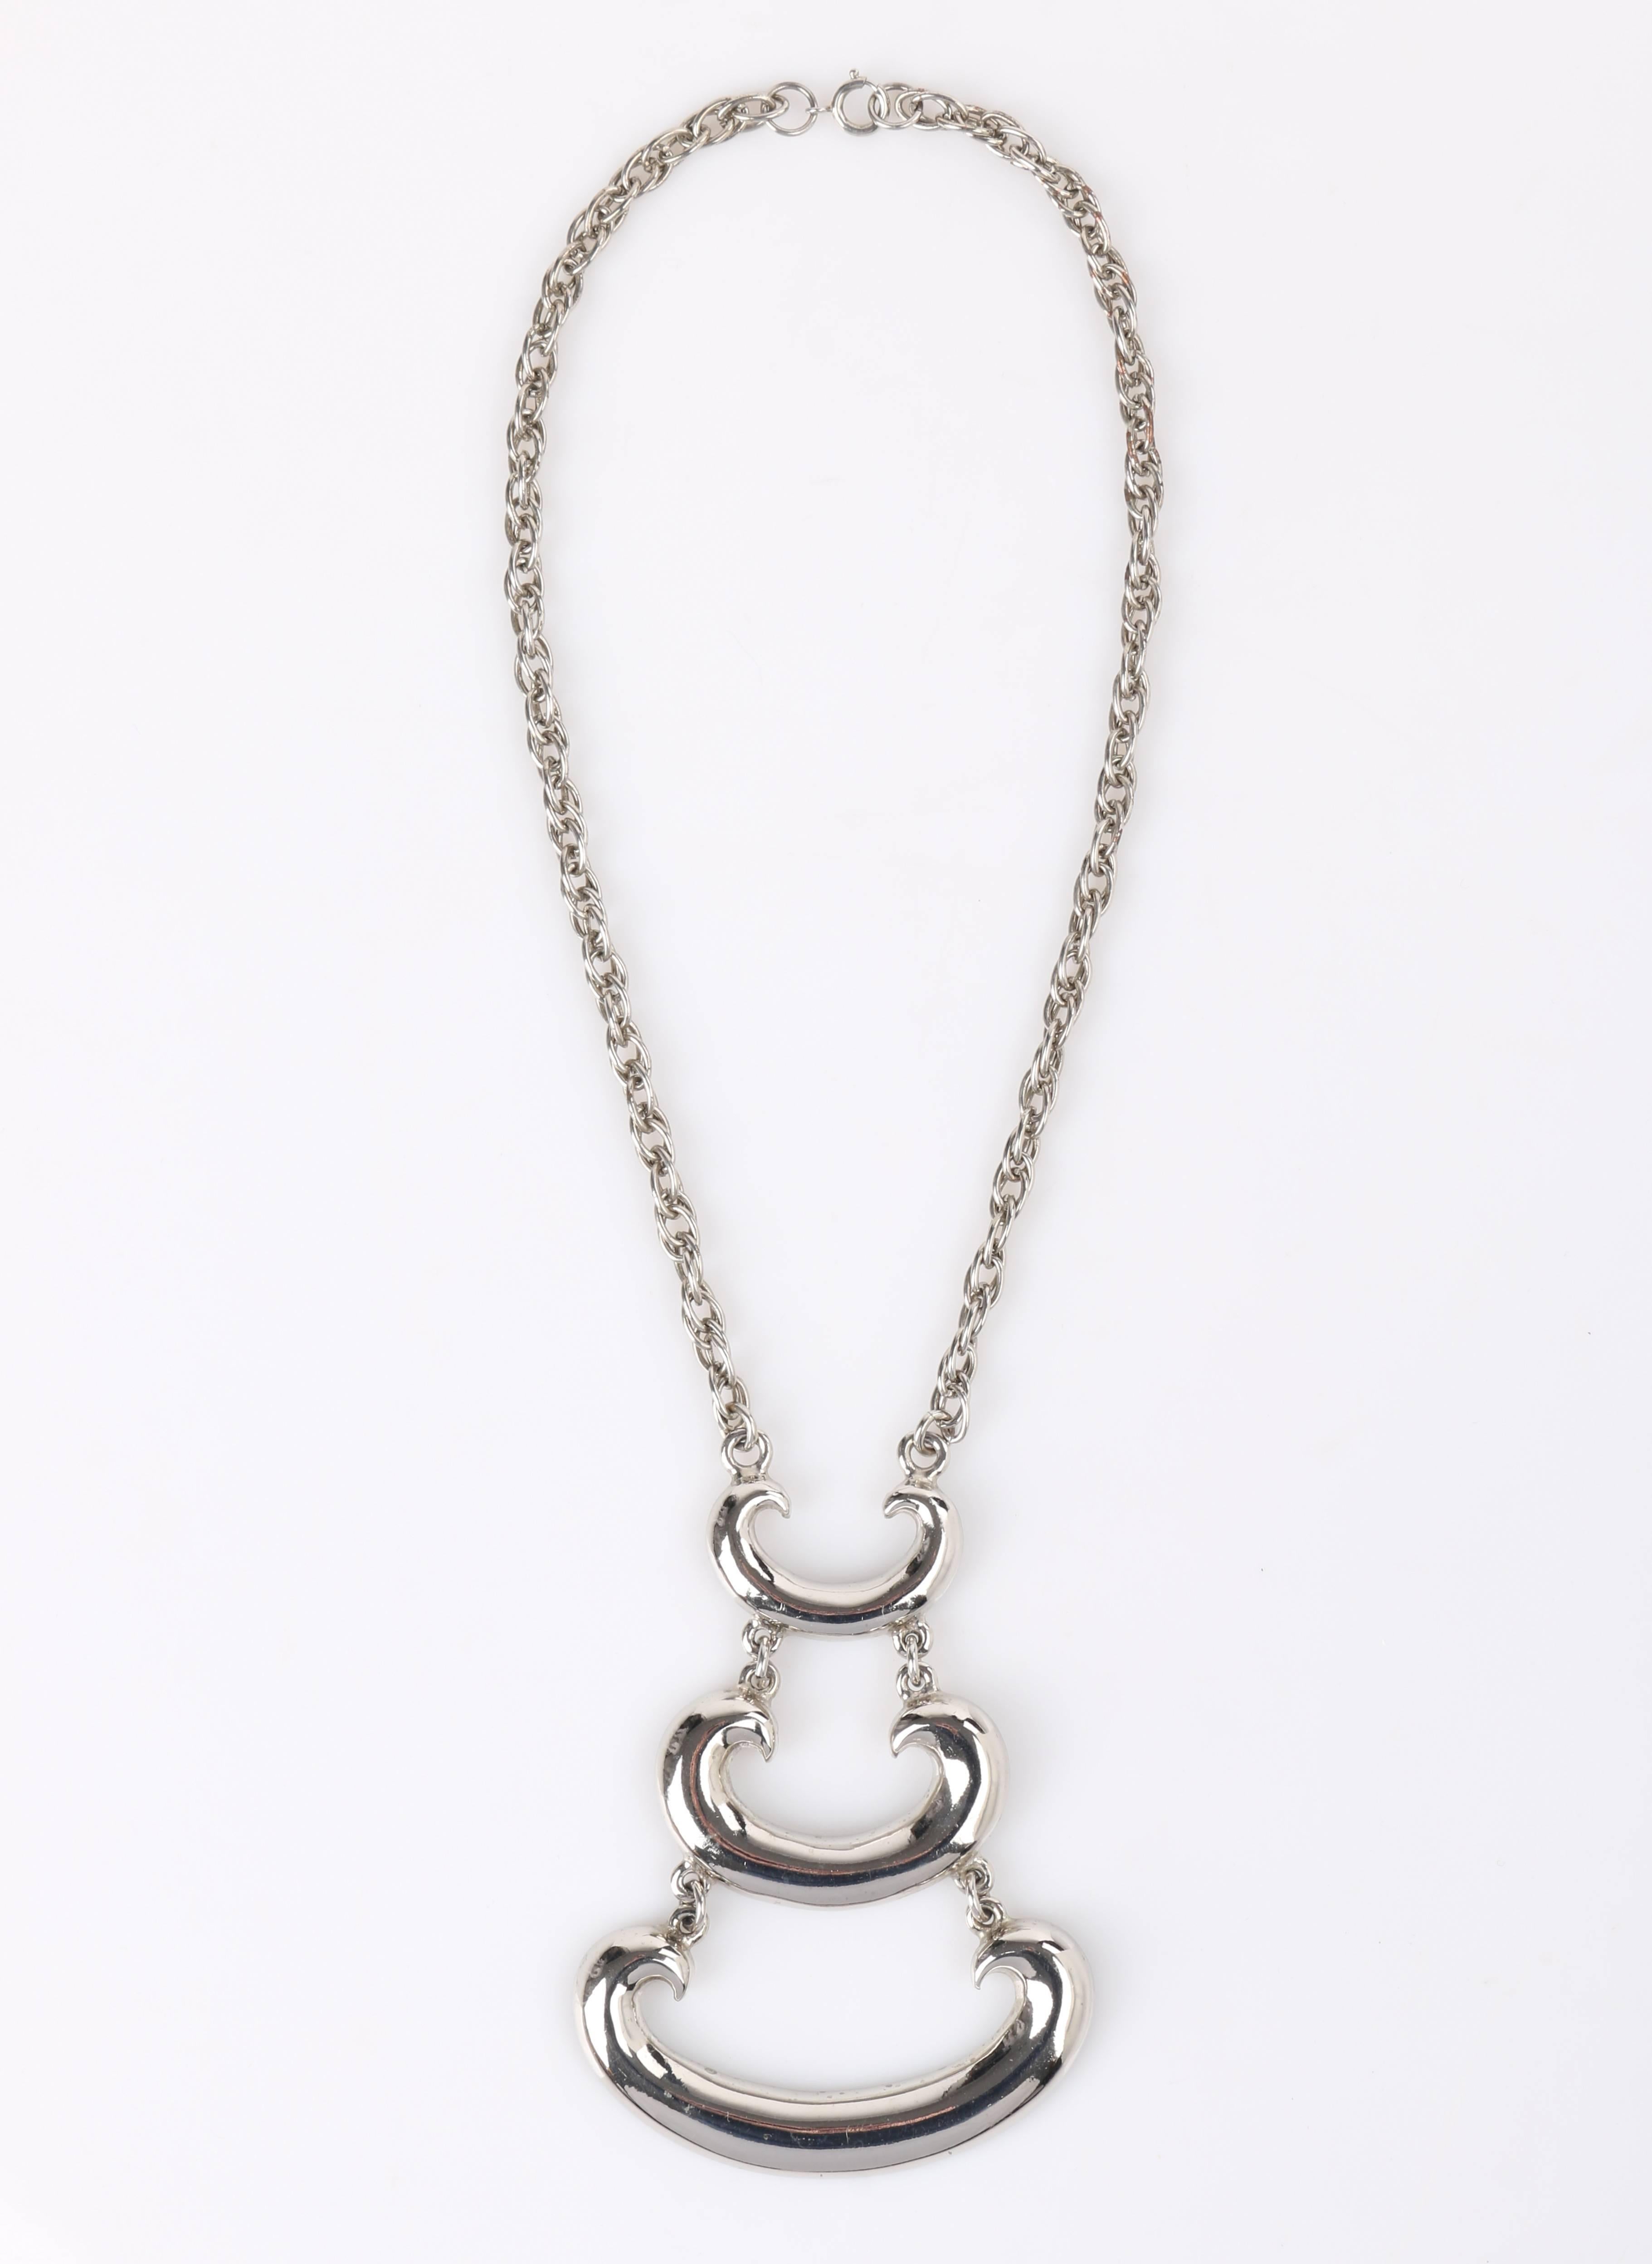 c.1960's Large Polished Silver Modernist Tiered Pendant Statement Necklace In Good Condition For Sale In Thiensville, WI